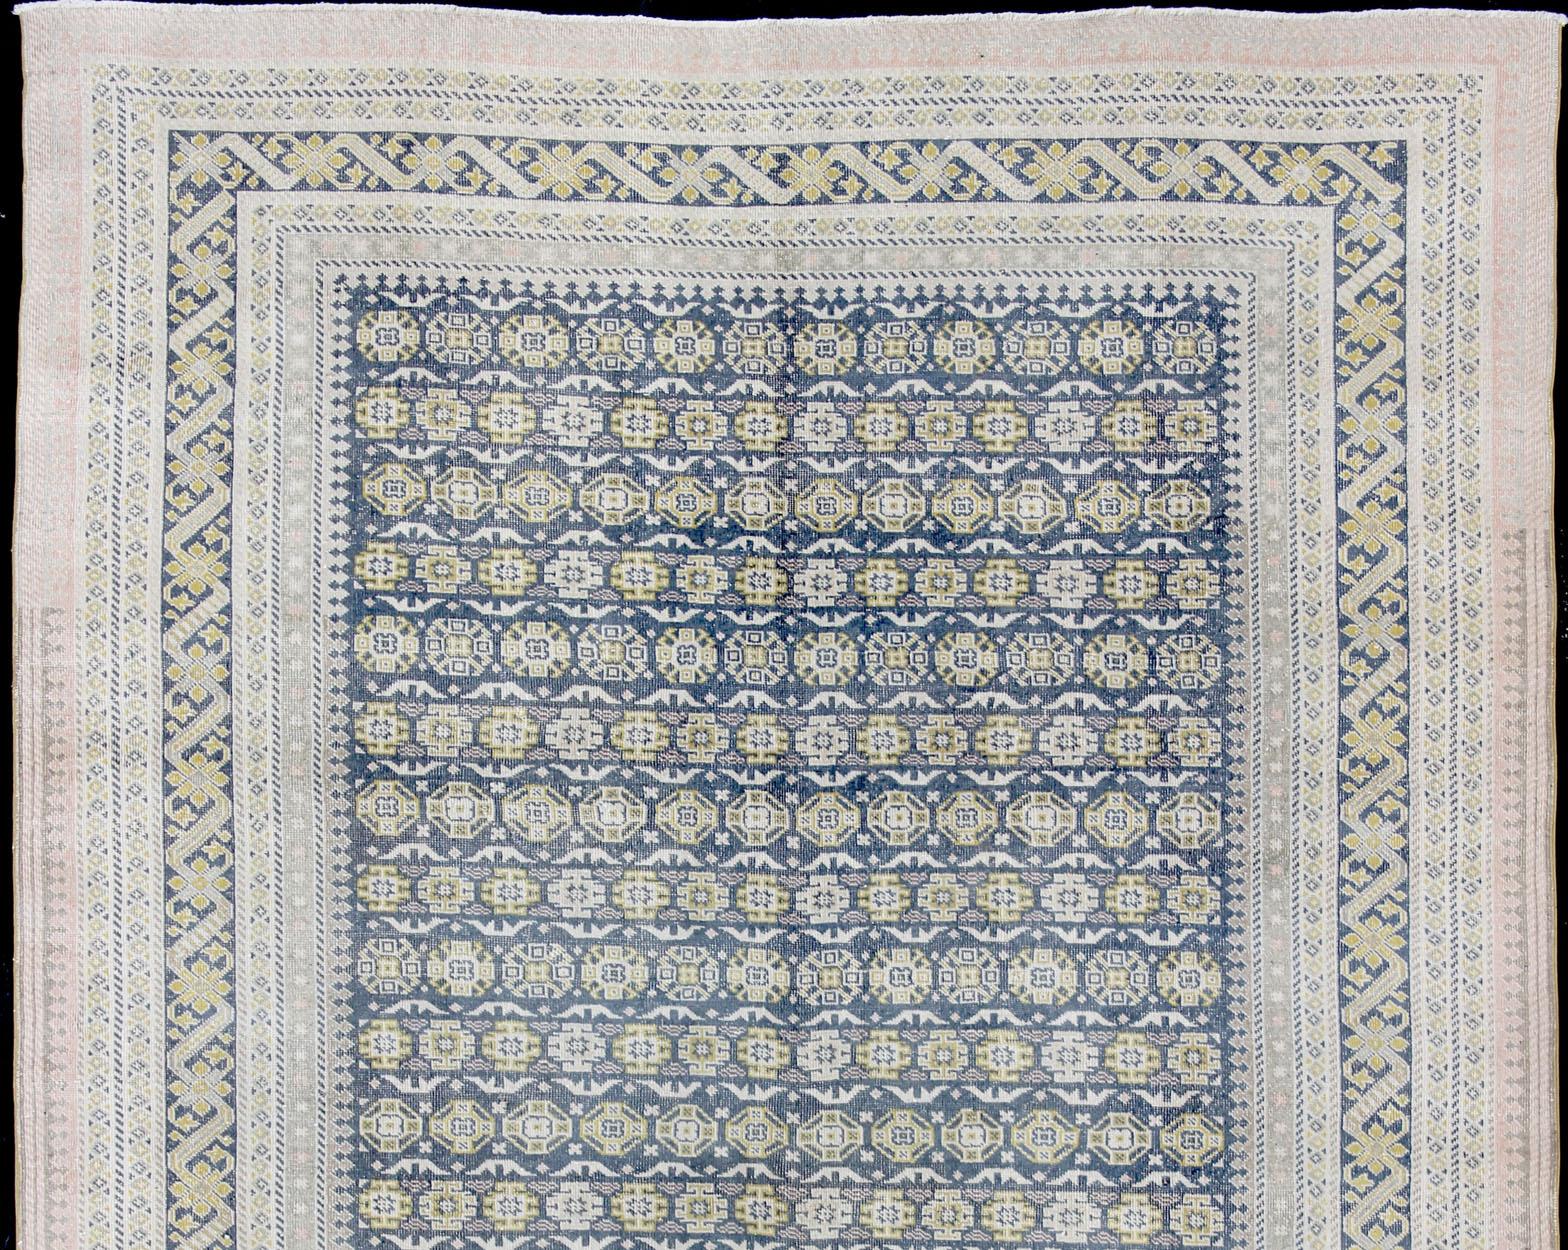 Turkish Antique Khotan Rug in Shades of Blue with Gray, L. Pink and Yellow Accents For Sale